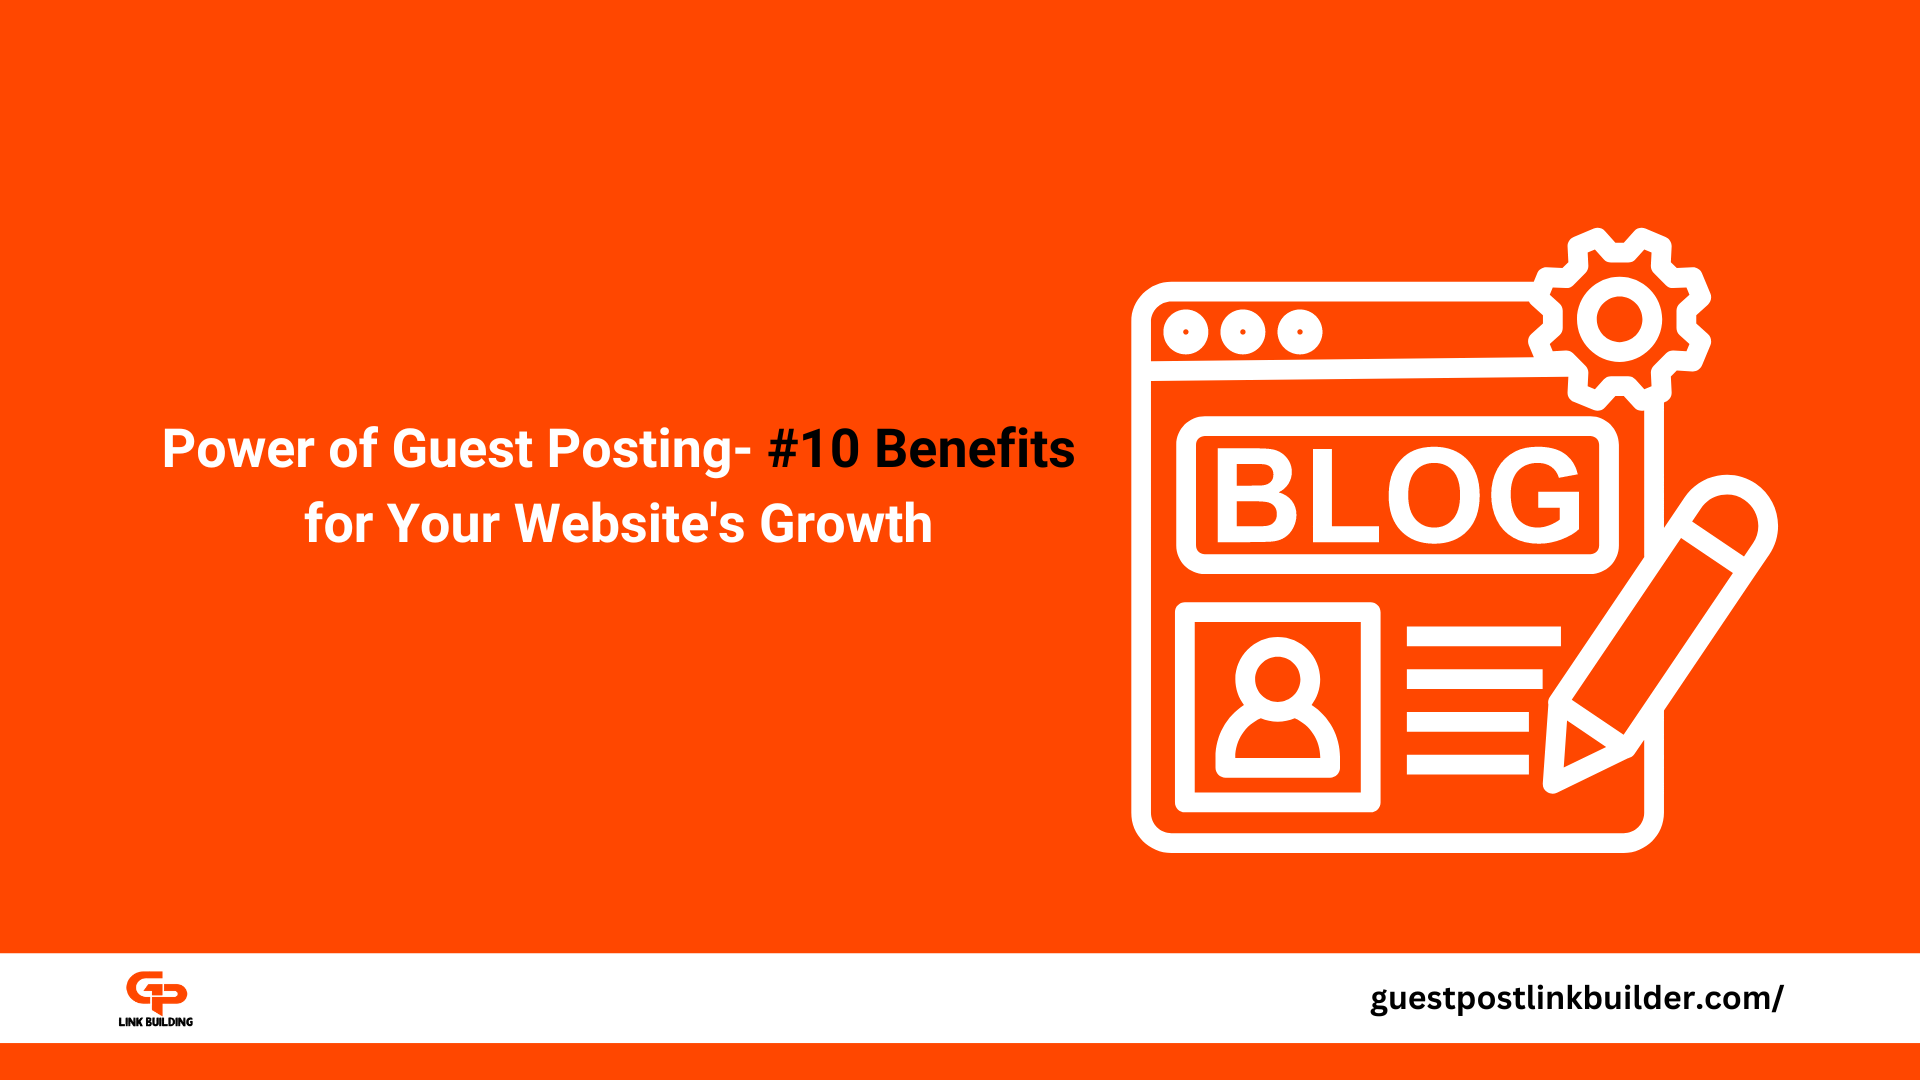 Power of Guest Posting- #10 Benefits for Your Website Growth